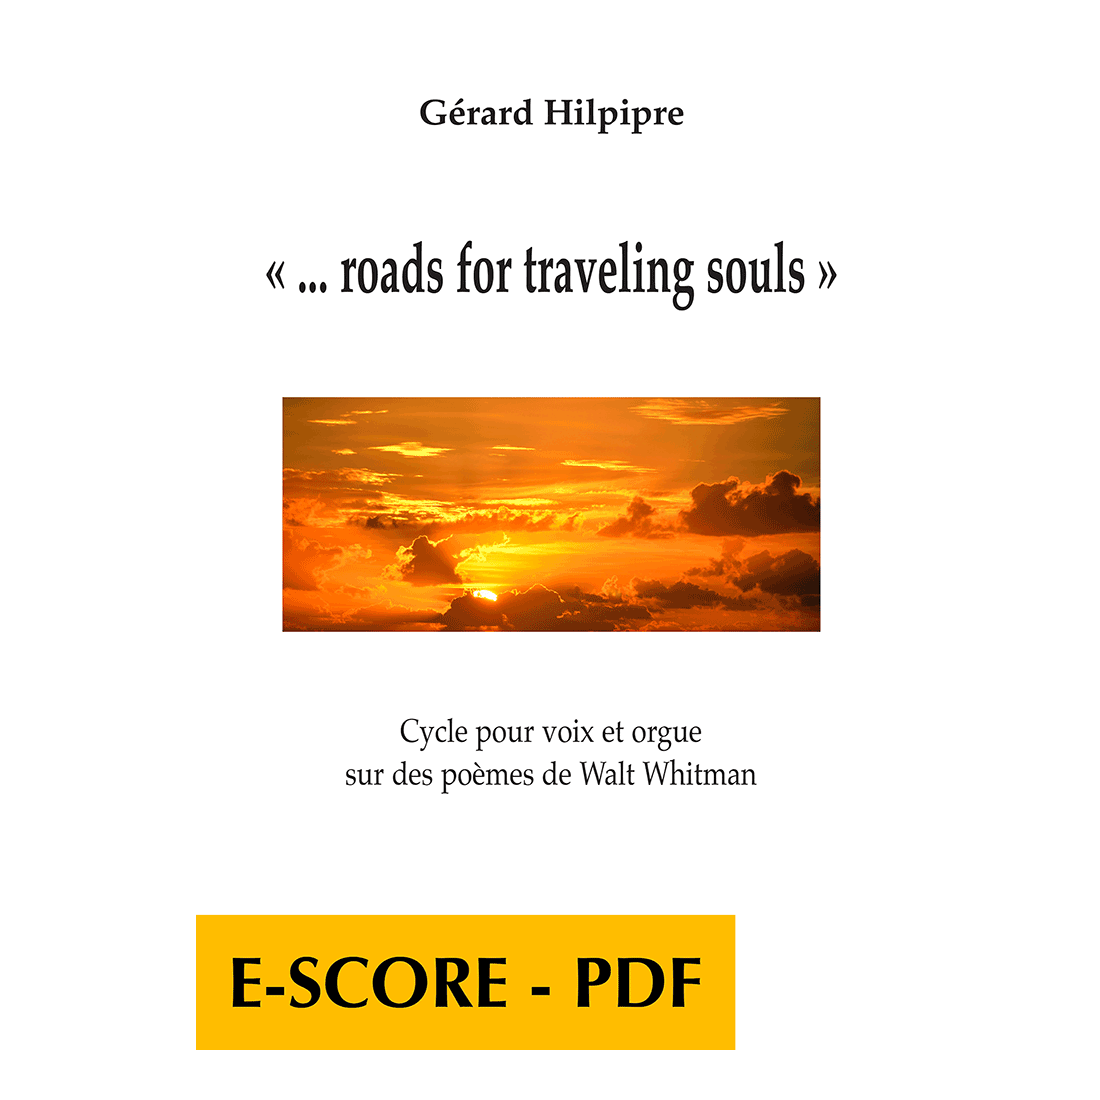 Roads for traveling souls for voice and organ - E-score PDF